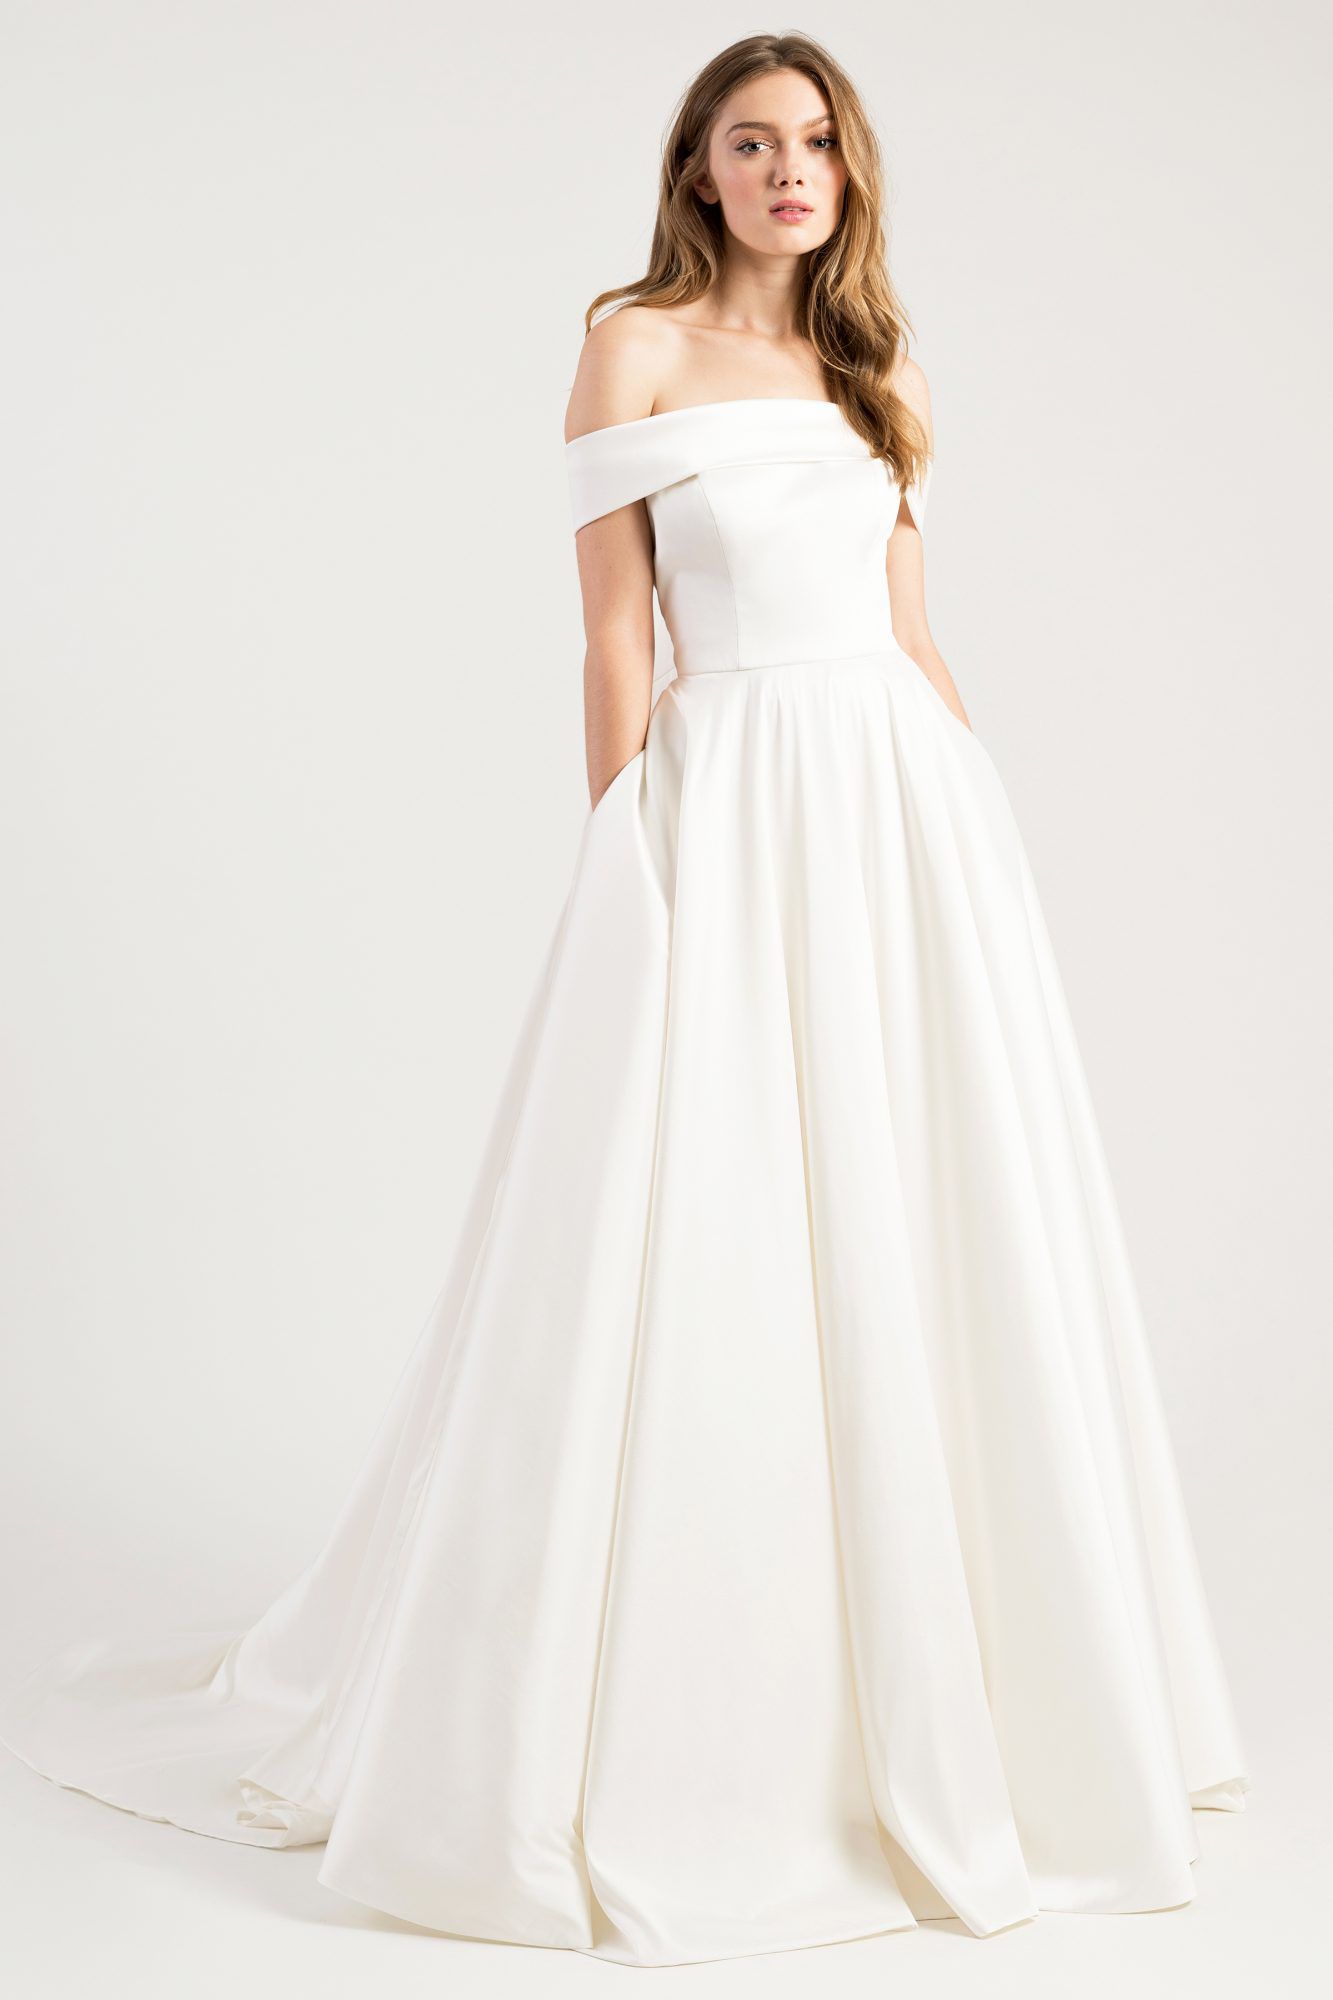 jenny by jenny yoo wedding dress off the shoulder ball gown simple